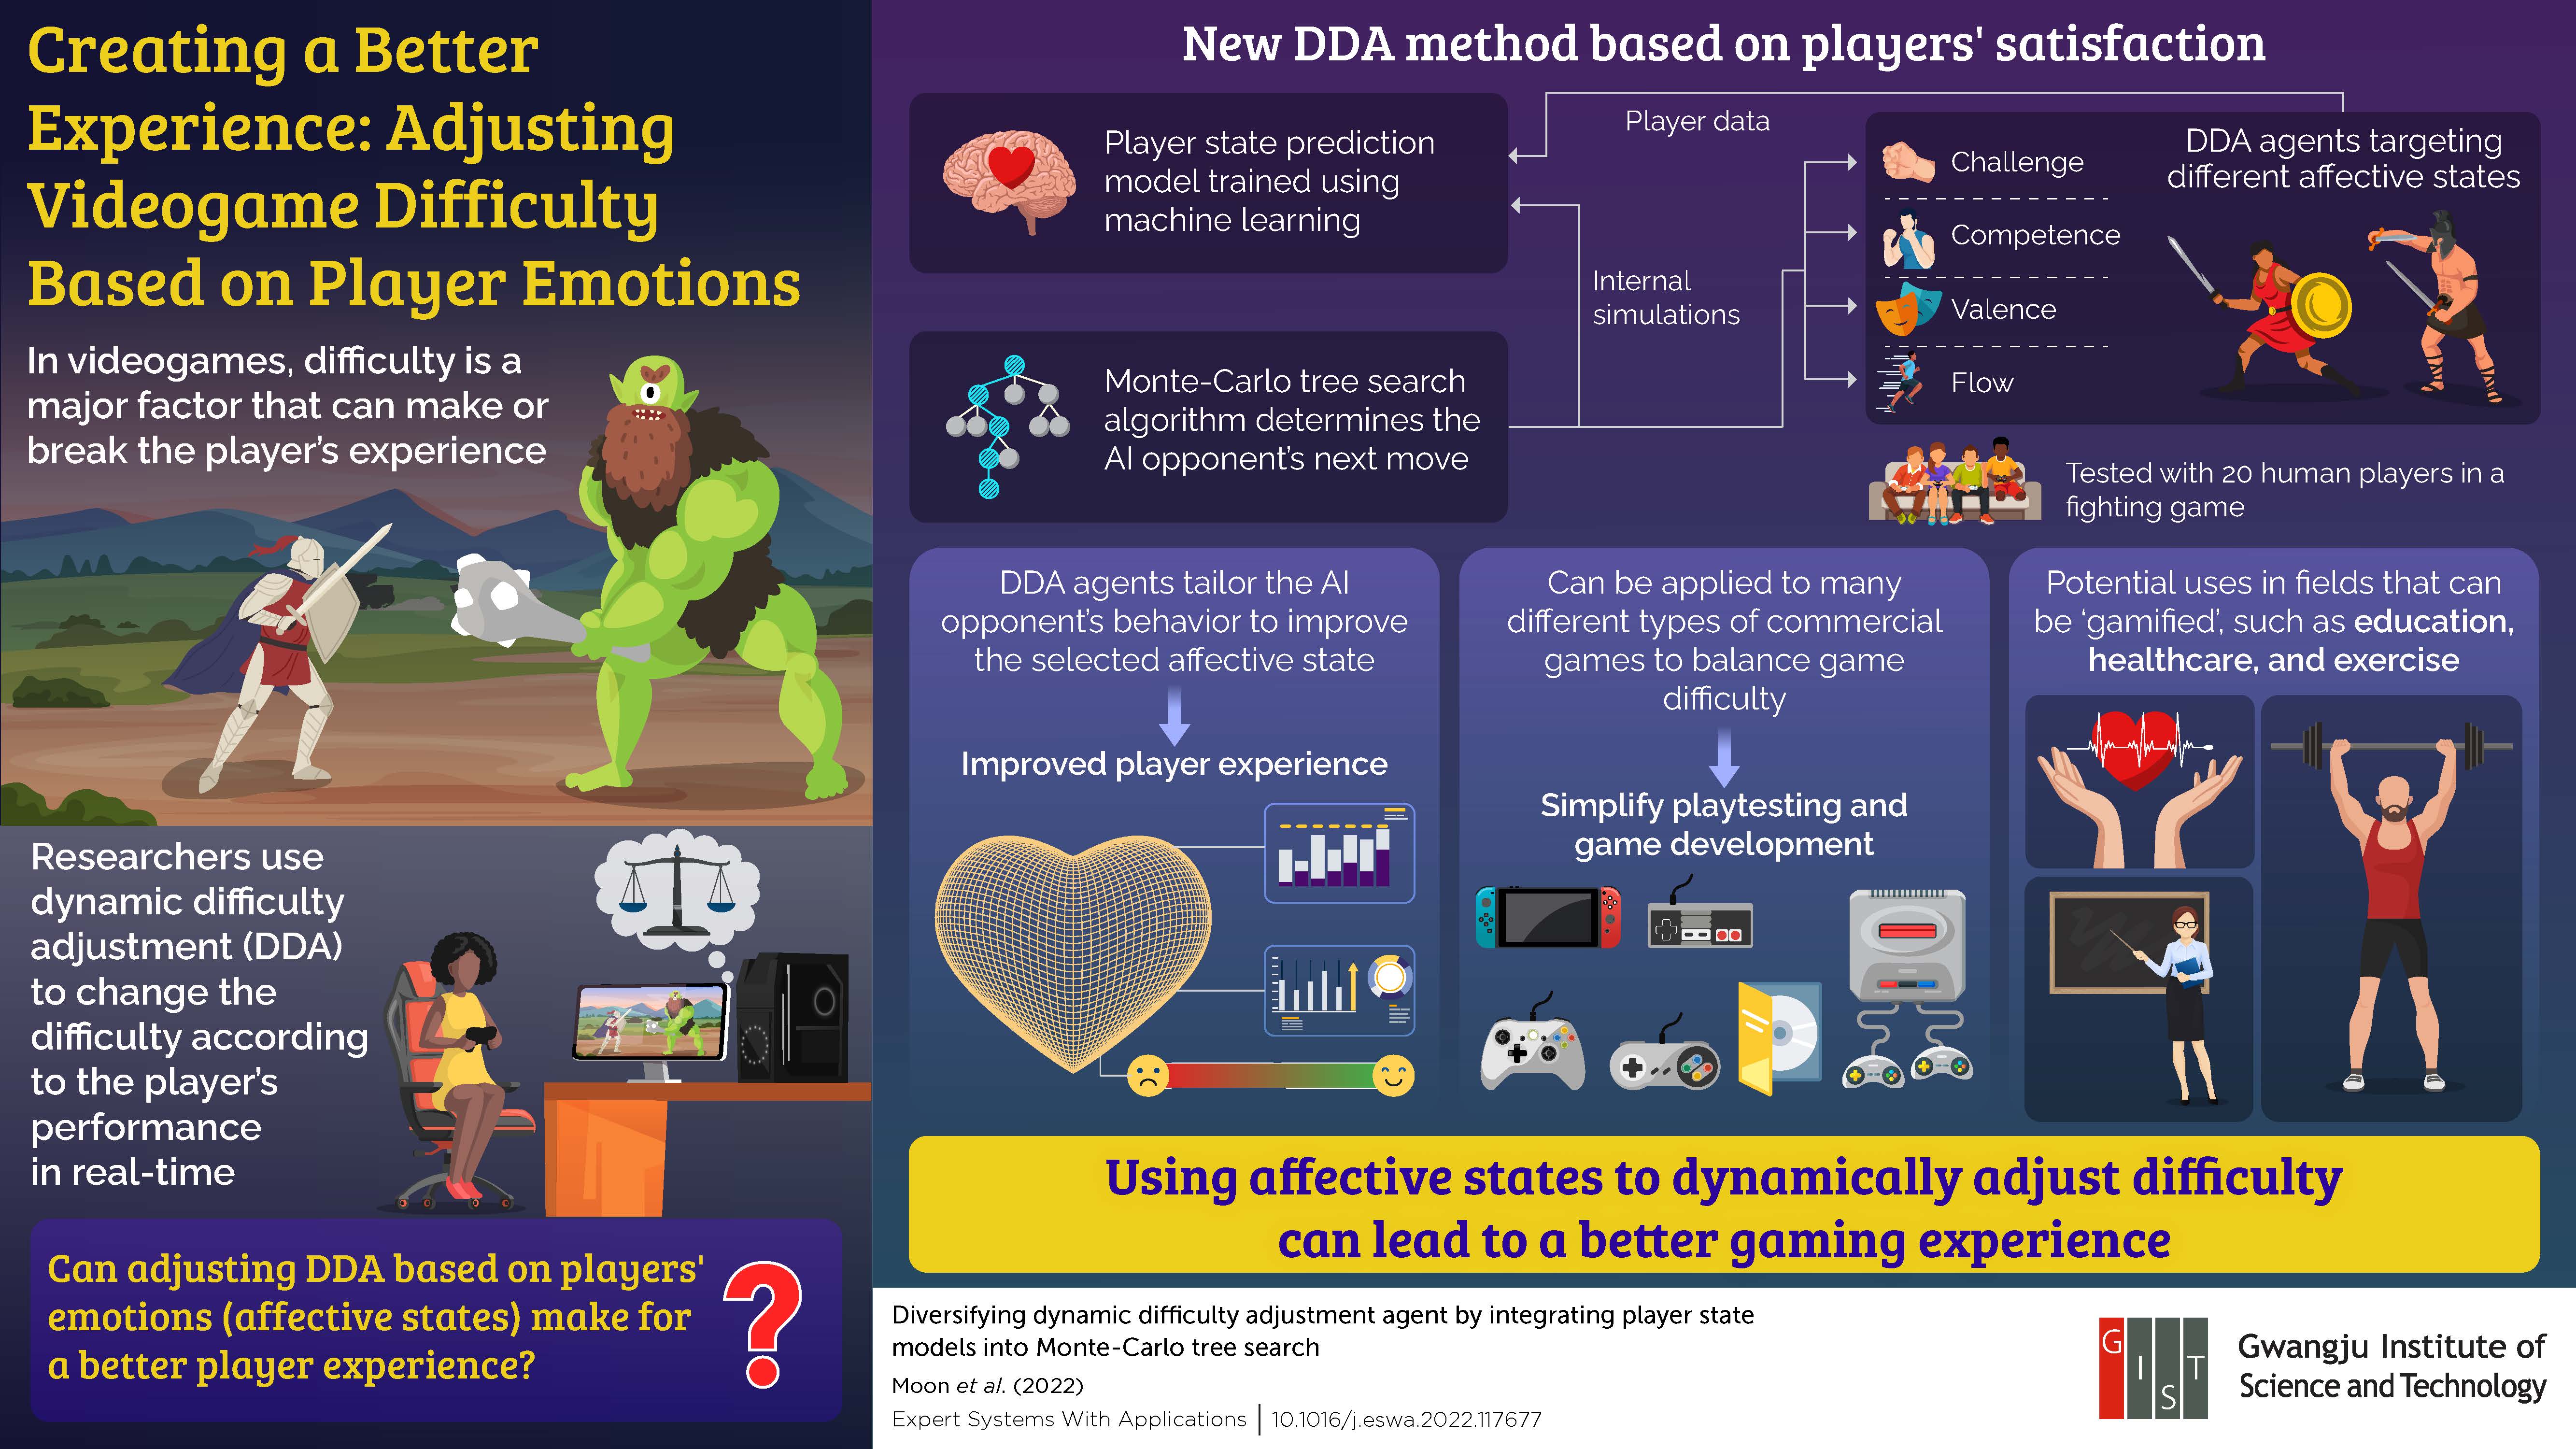 GIST Scientists Develop Model that Adjusts Videogame Difficulty Based on Player Emotions 이미지